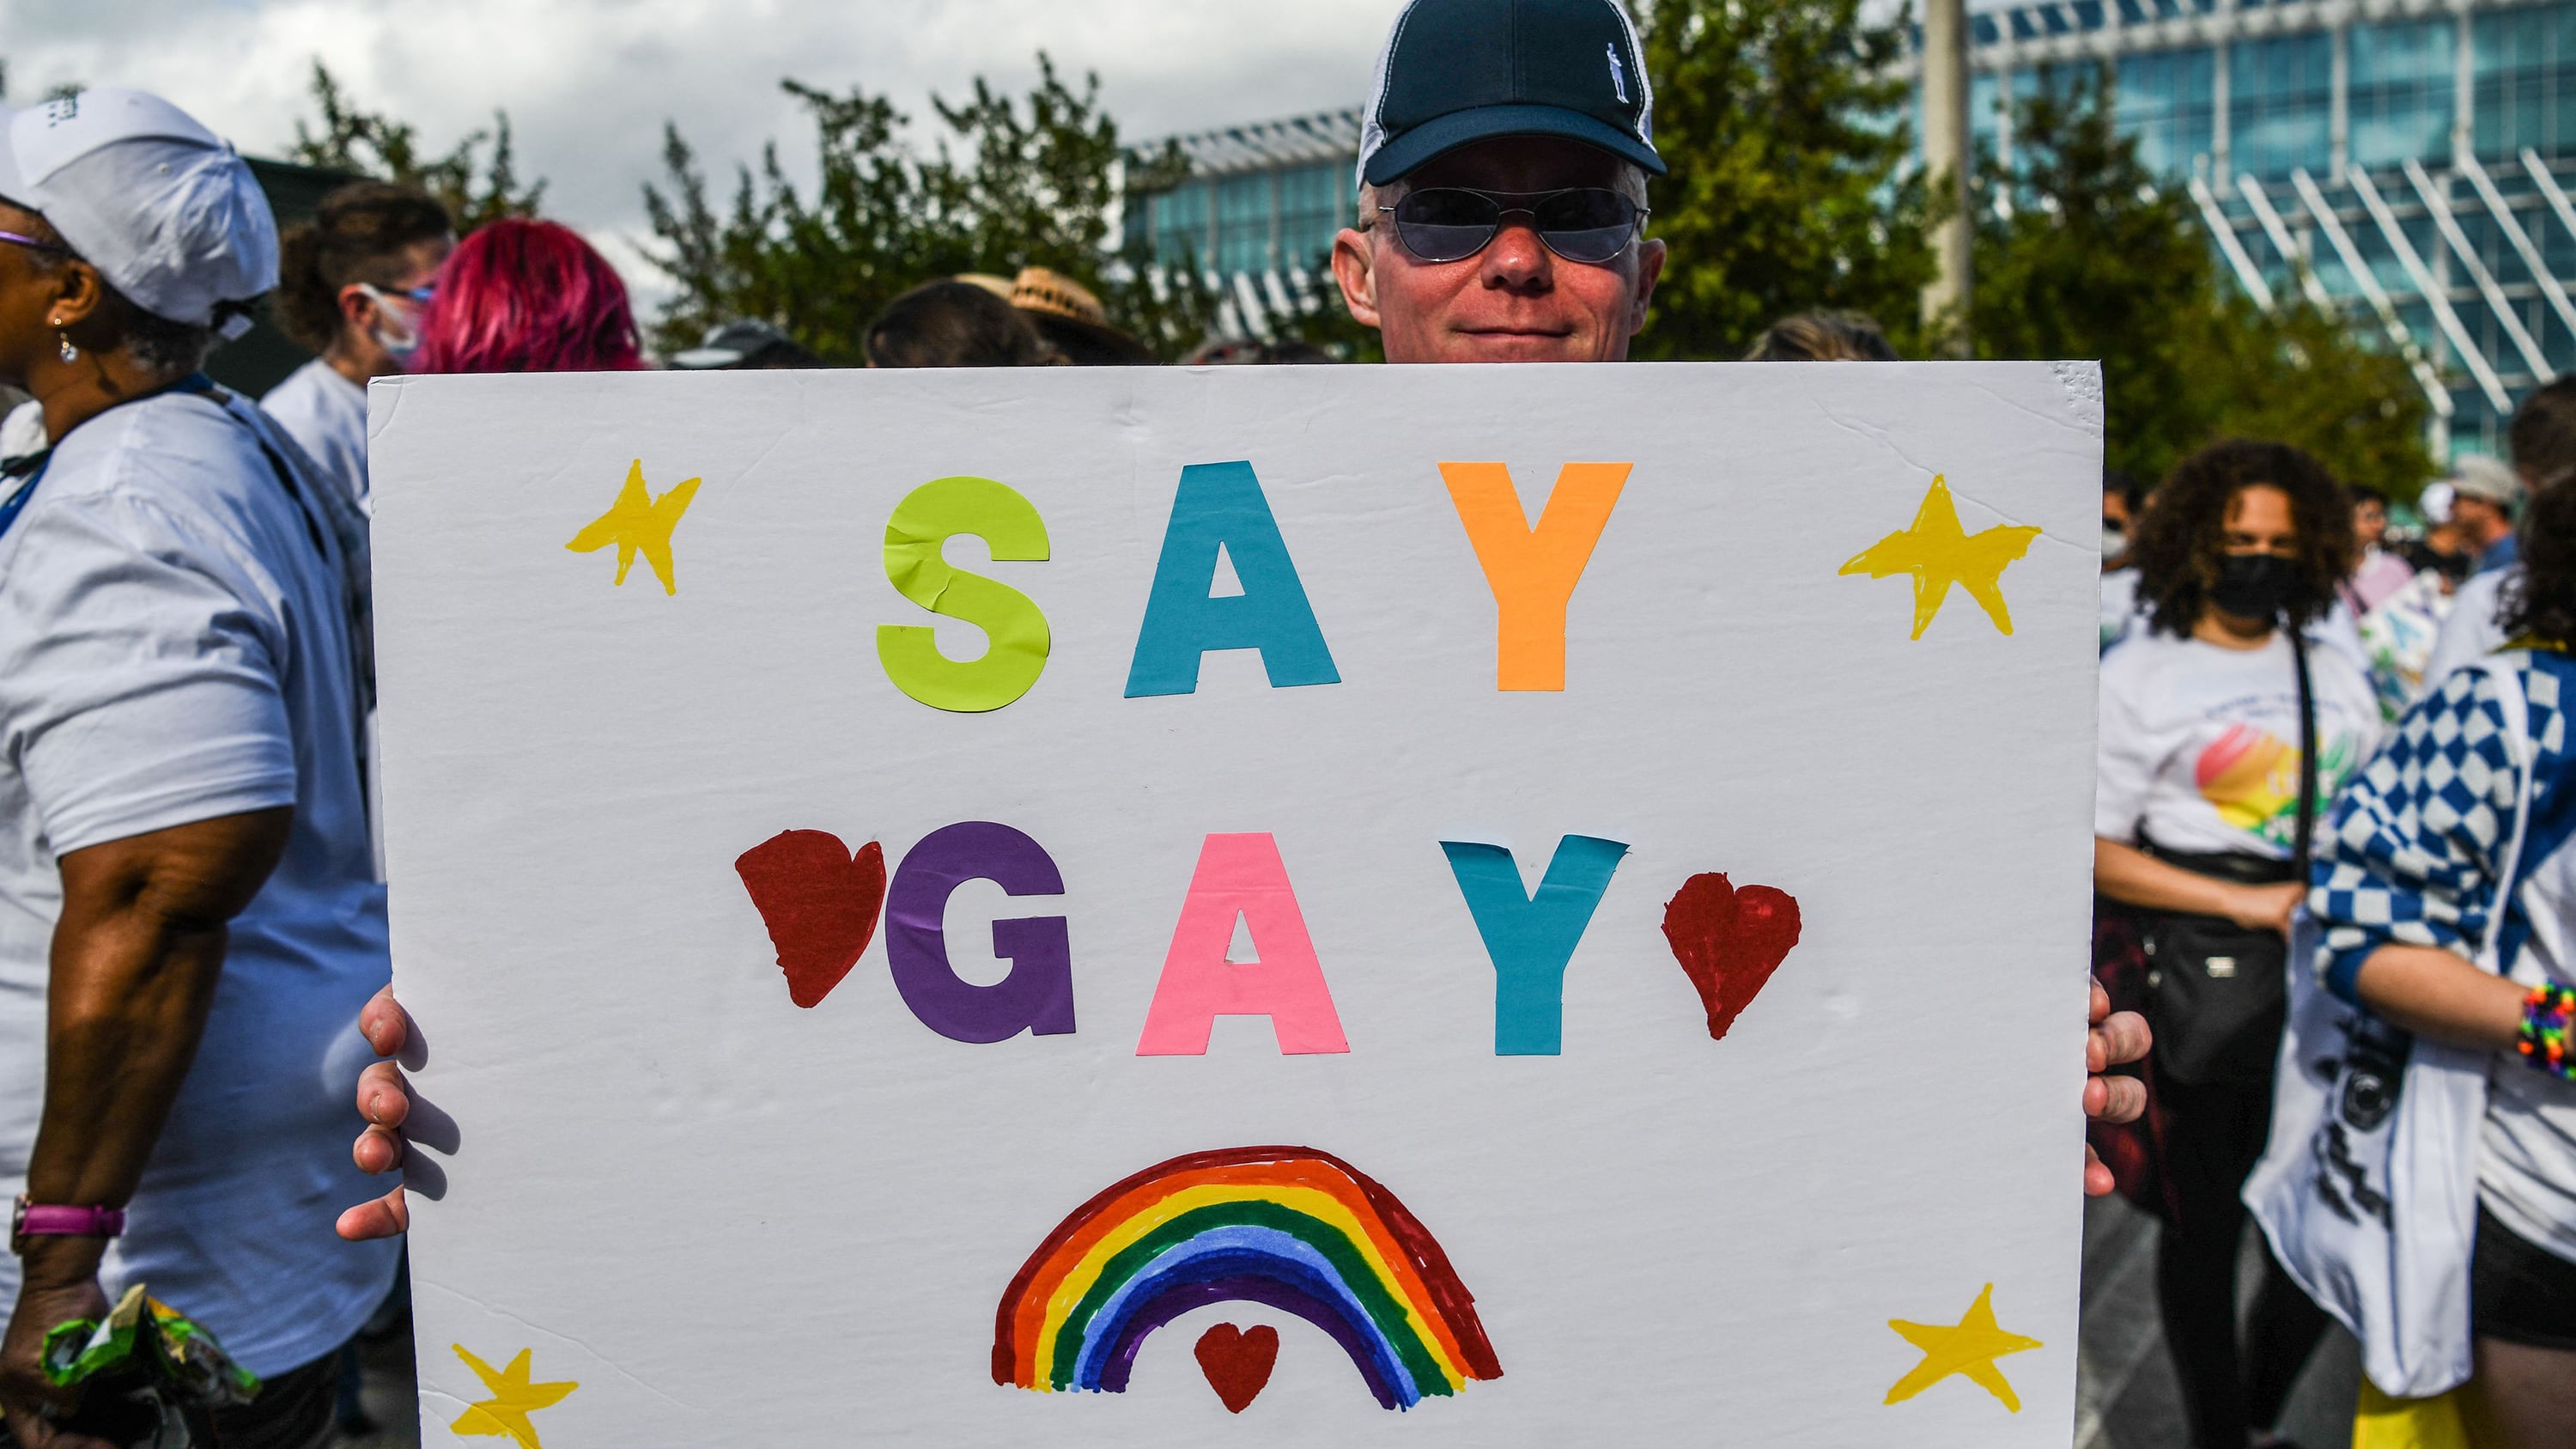 A person wearing a hat and holding a giant white sign with colorful letters that say "SAY GAY" with a rainbow, stars and hearts with people standing in the background.